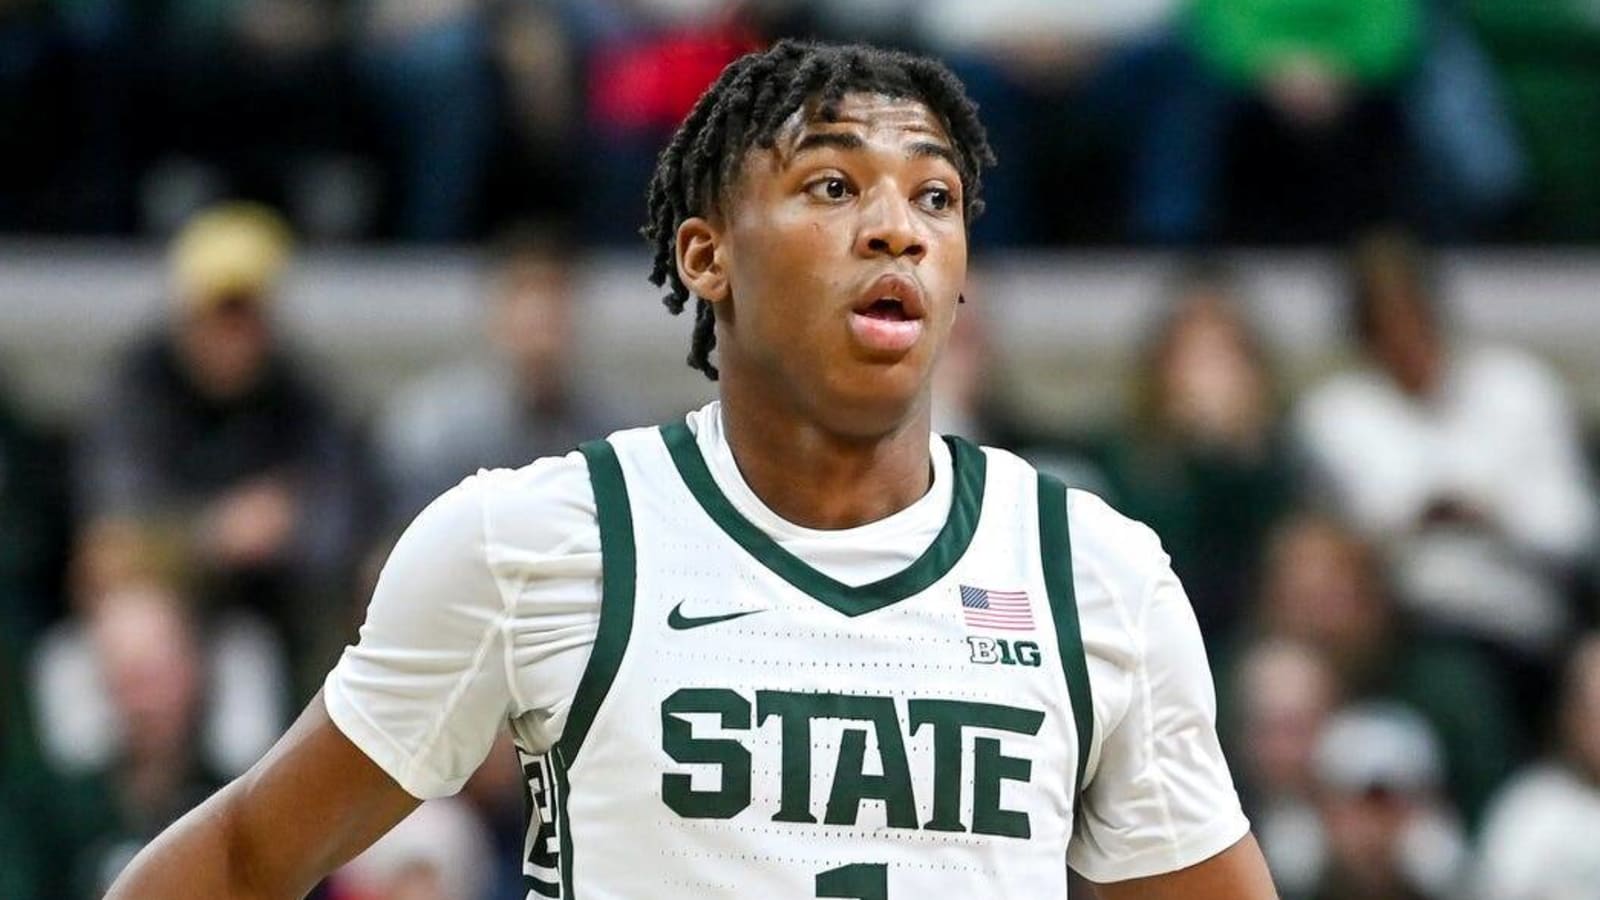 Michigan State basketball player recovering after being shot in leg